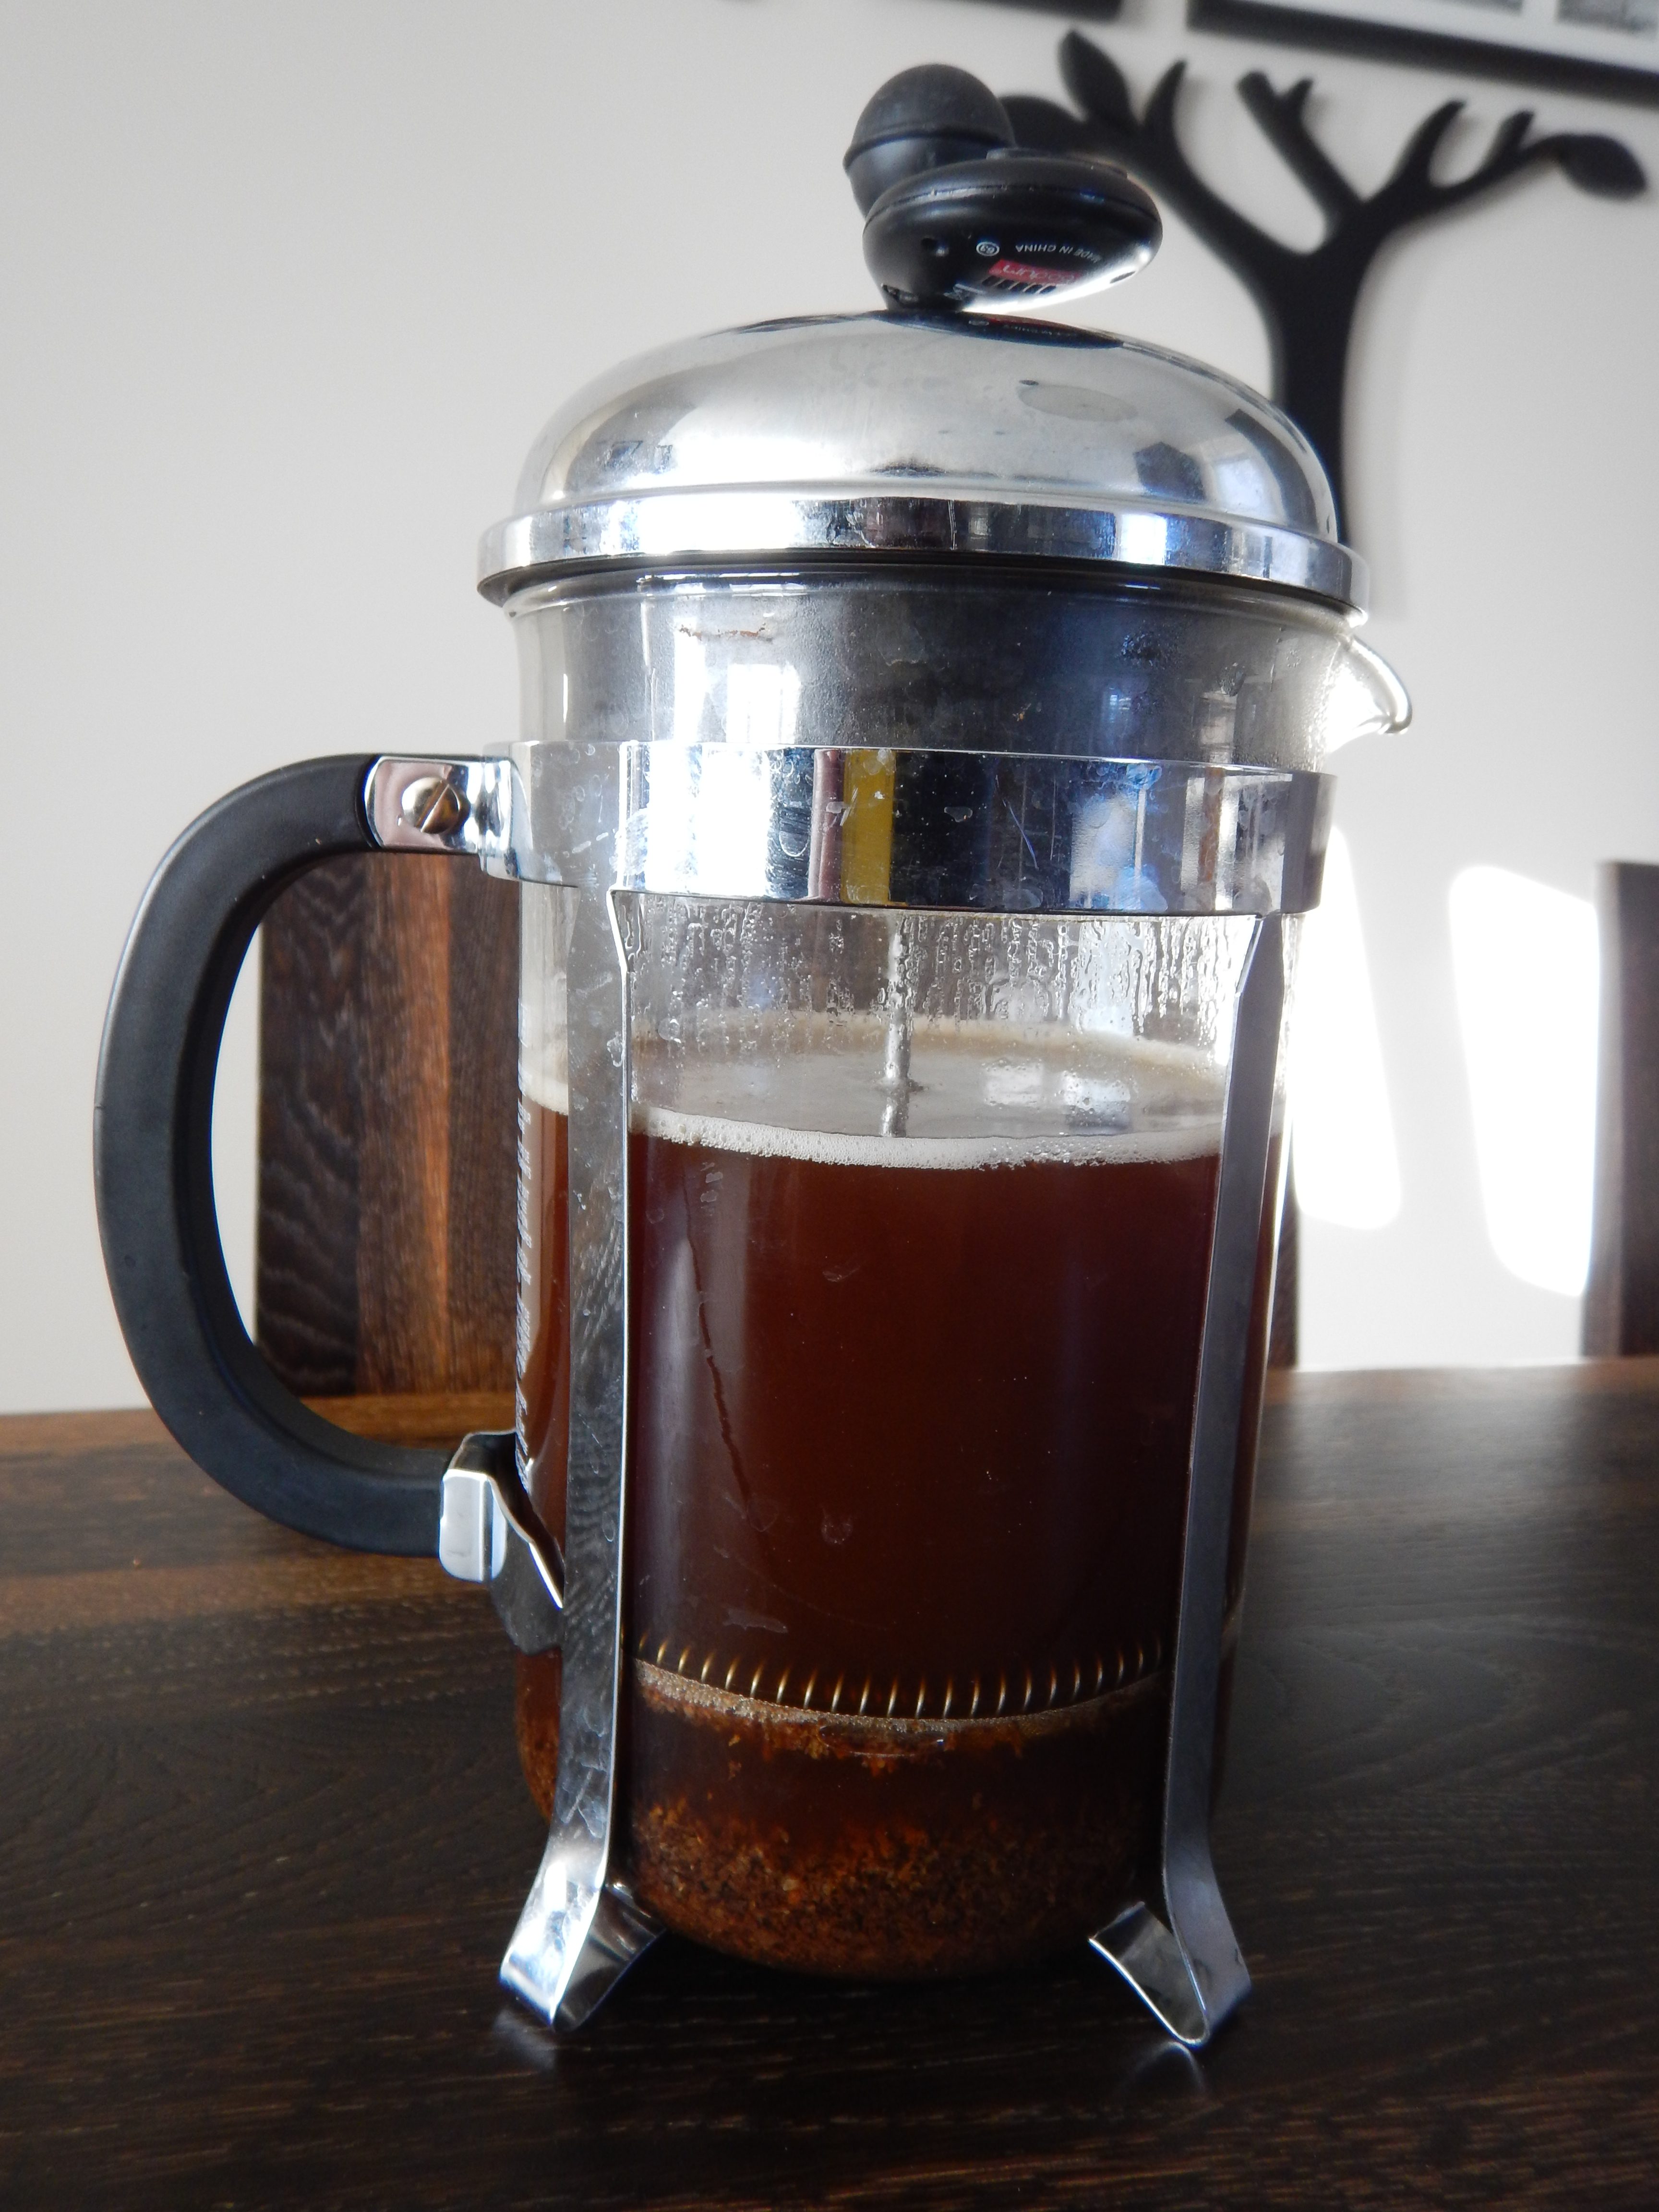 8 Best French Press Not Made in China - No, Not Made in China